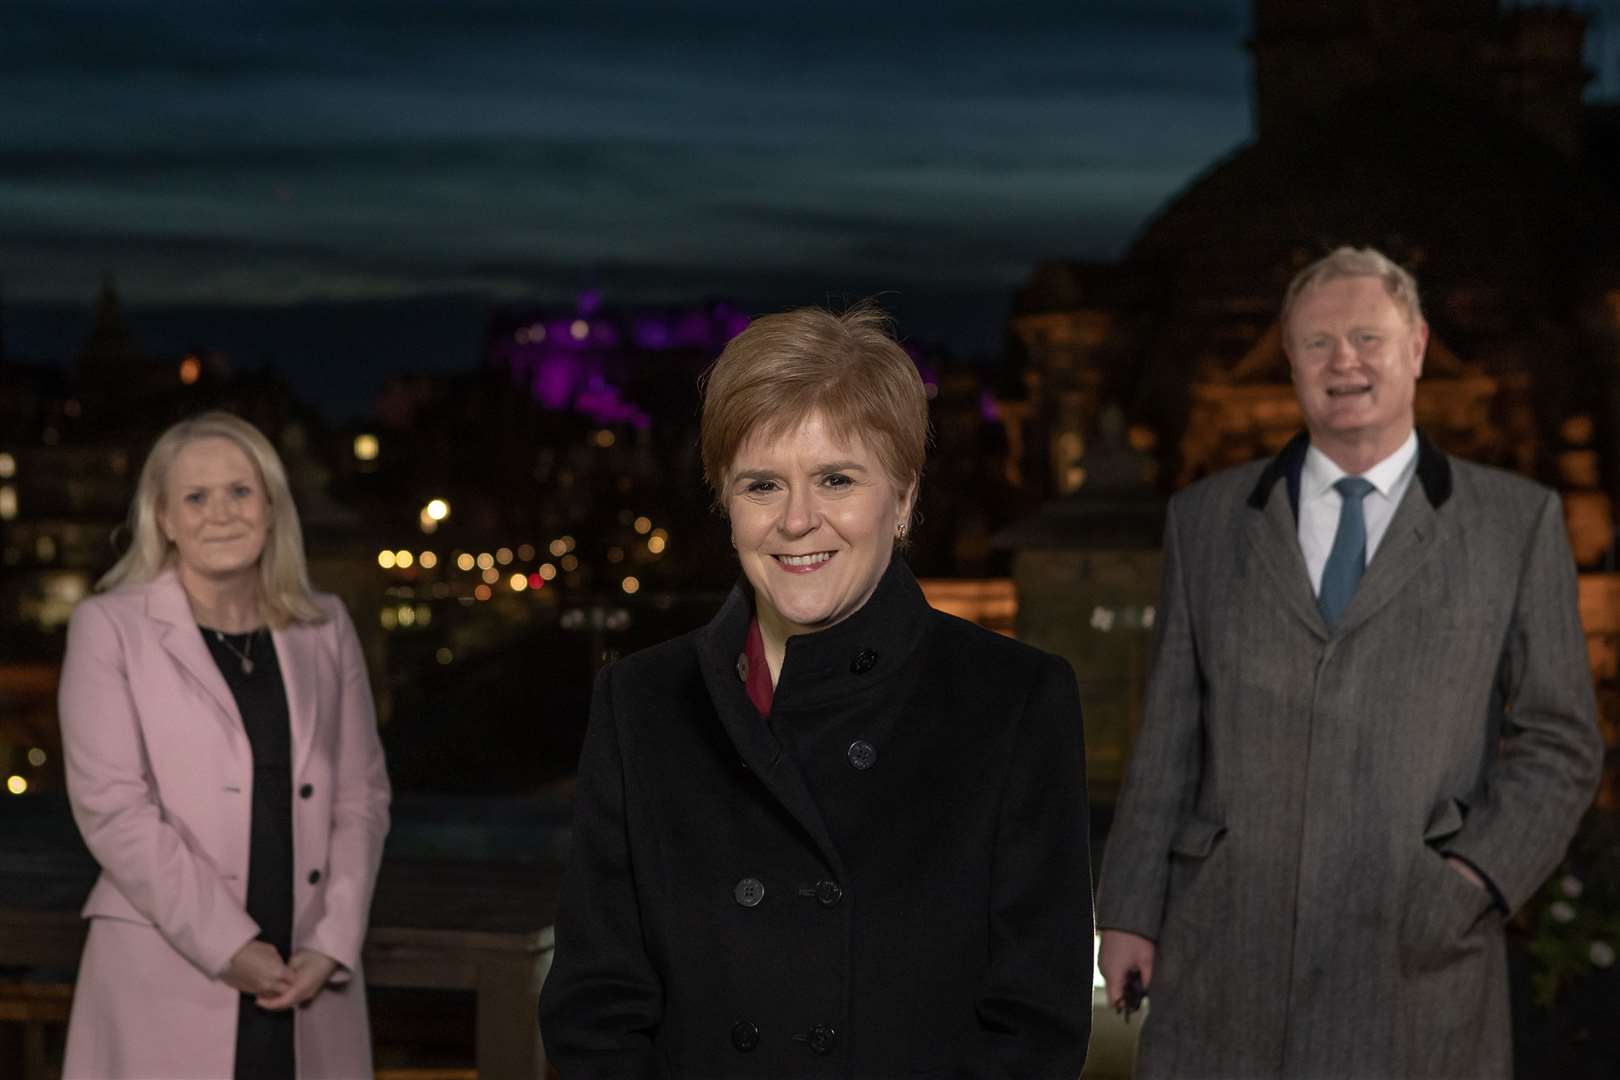 First Minister Nicola Sturgeon joined by Scottish National Investment Bank CEO Eilidh Mactaggart and chair Willie Watt